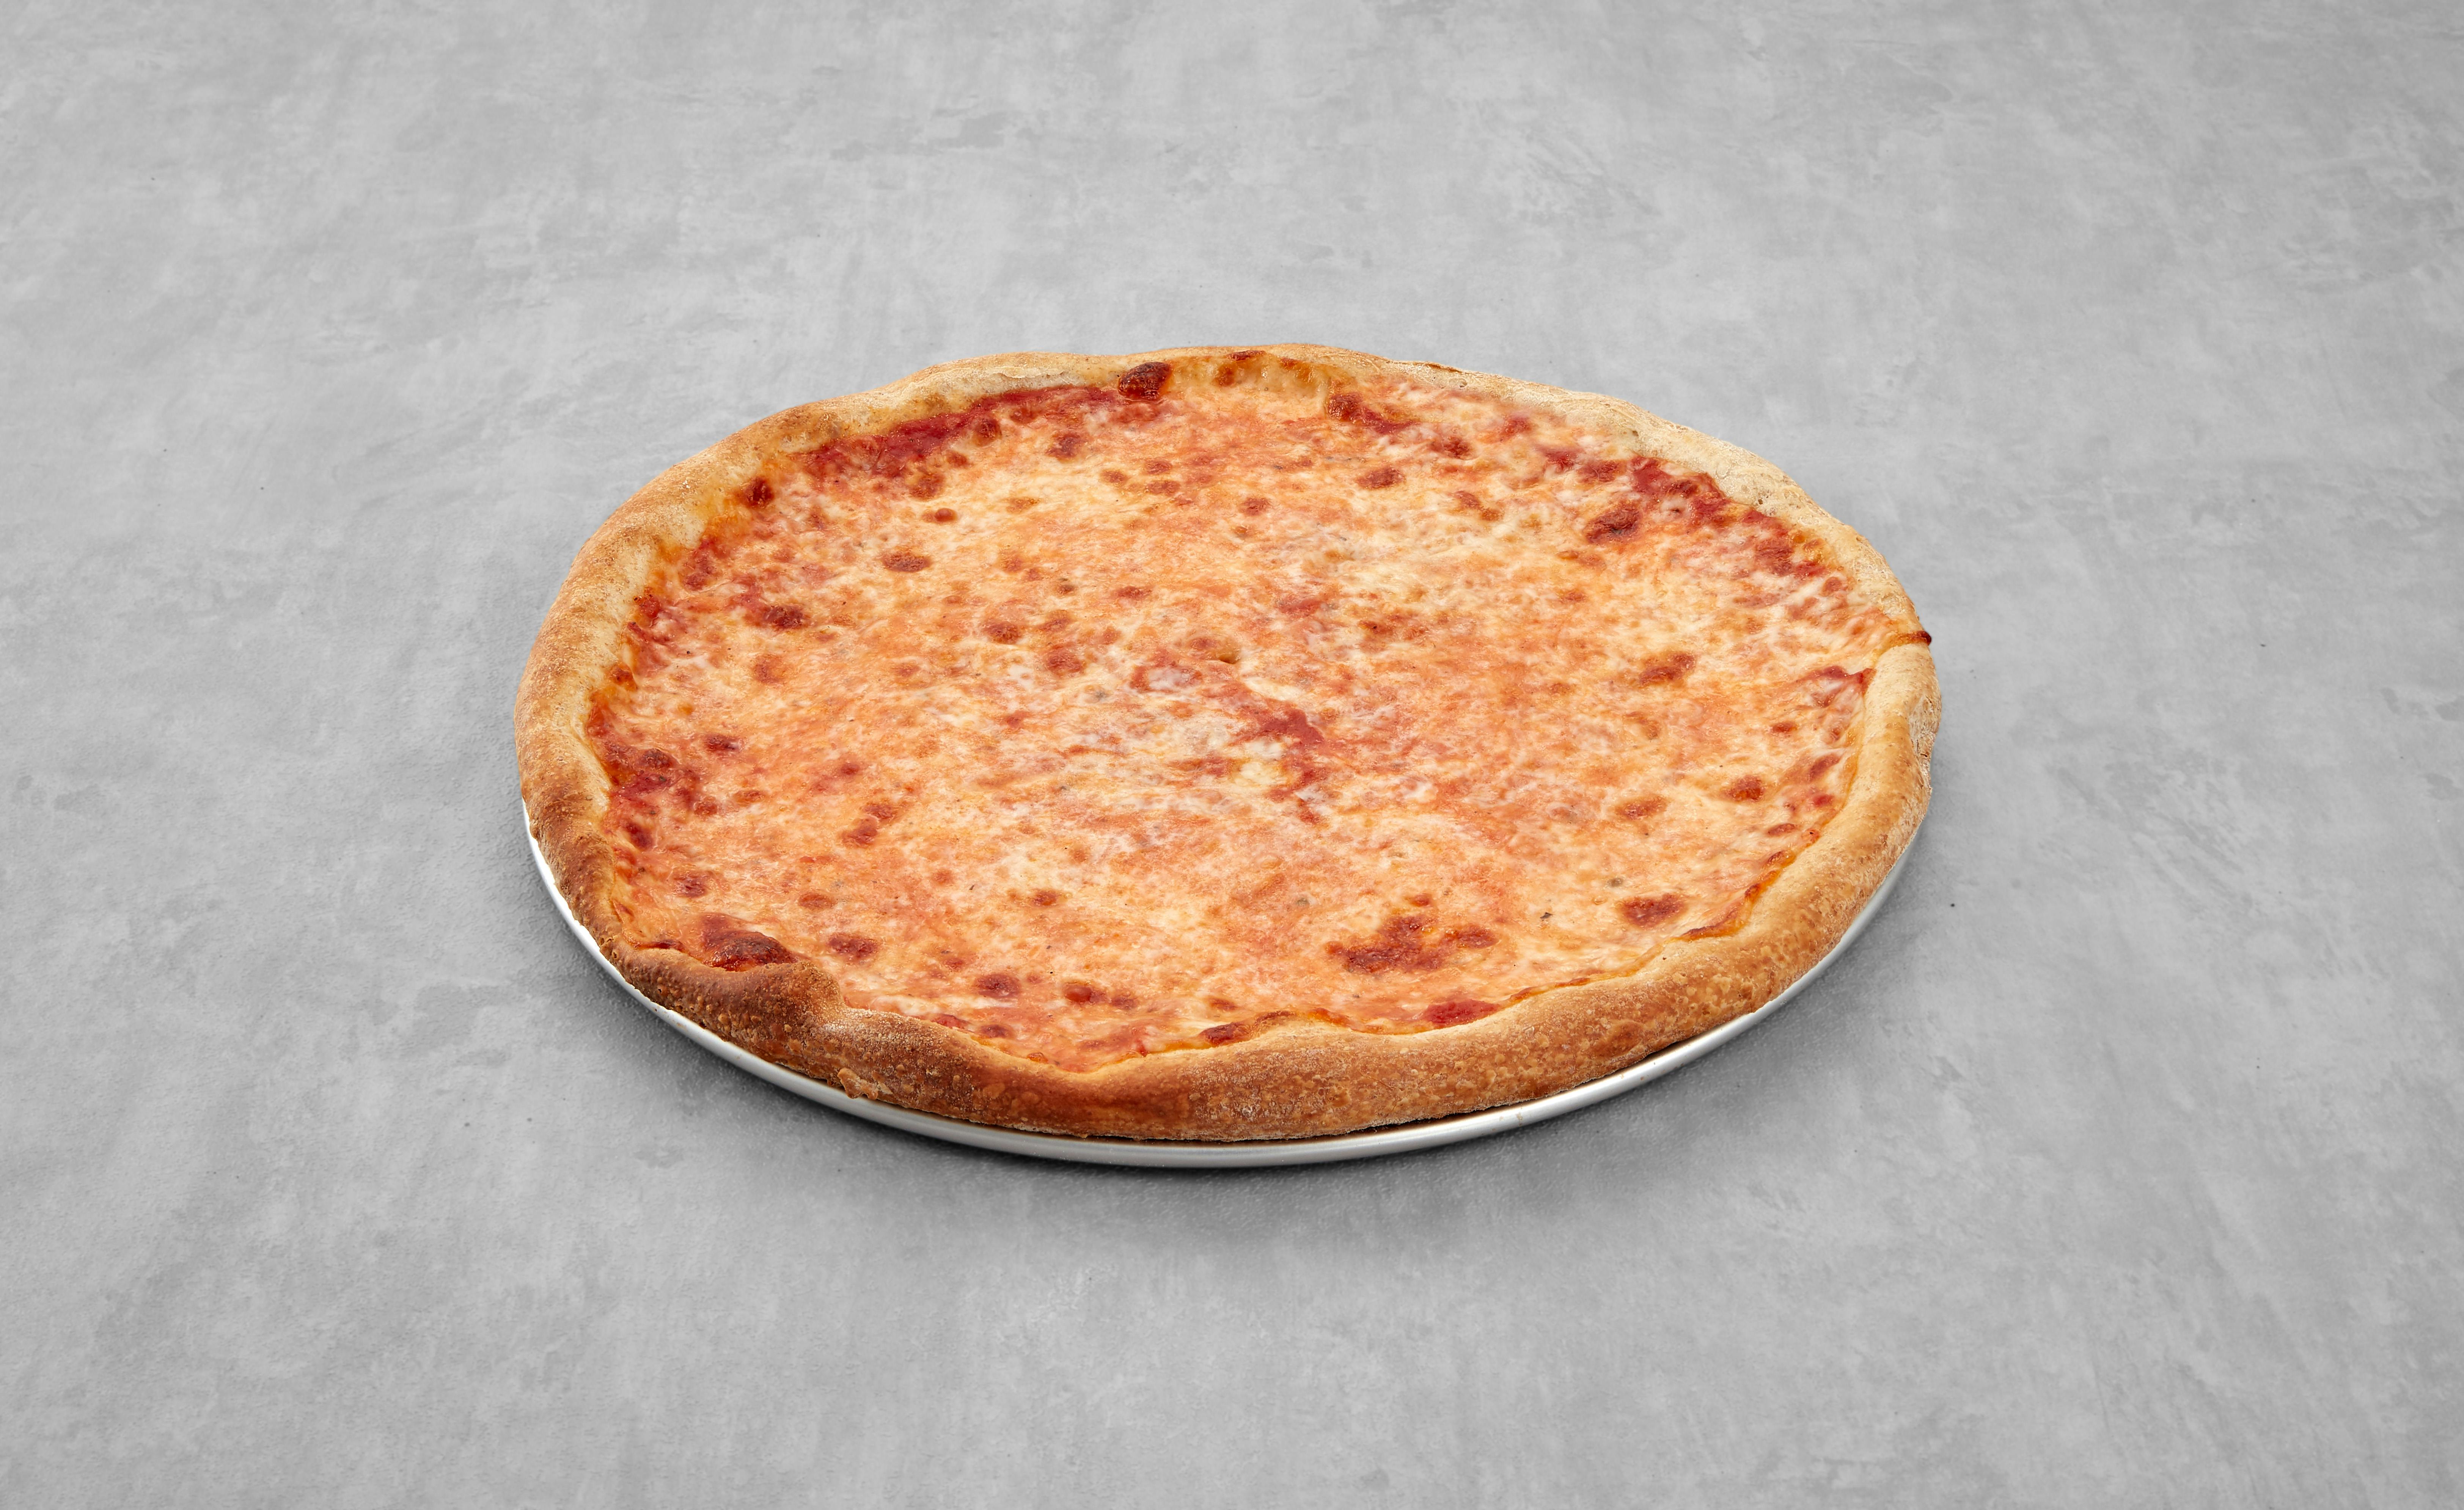 Whole Wheat Regular Cheese Pizza from Mario's Pizzeria in Seaford, NY